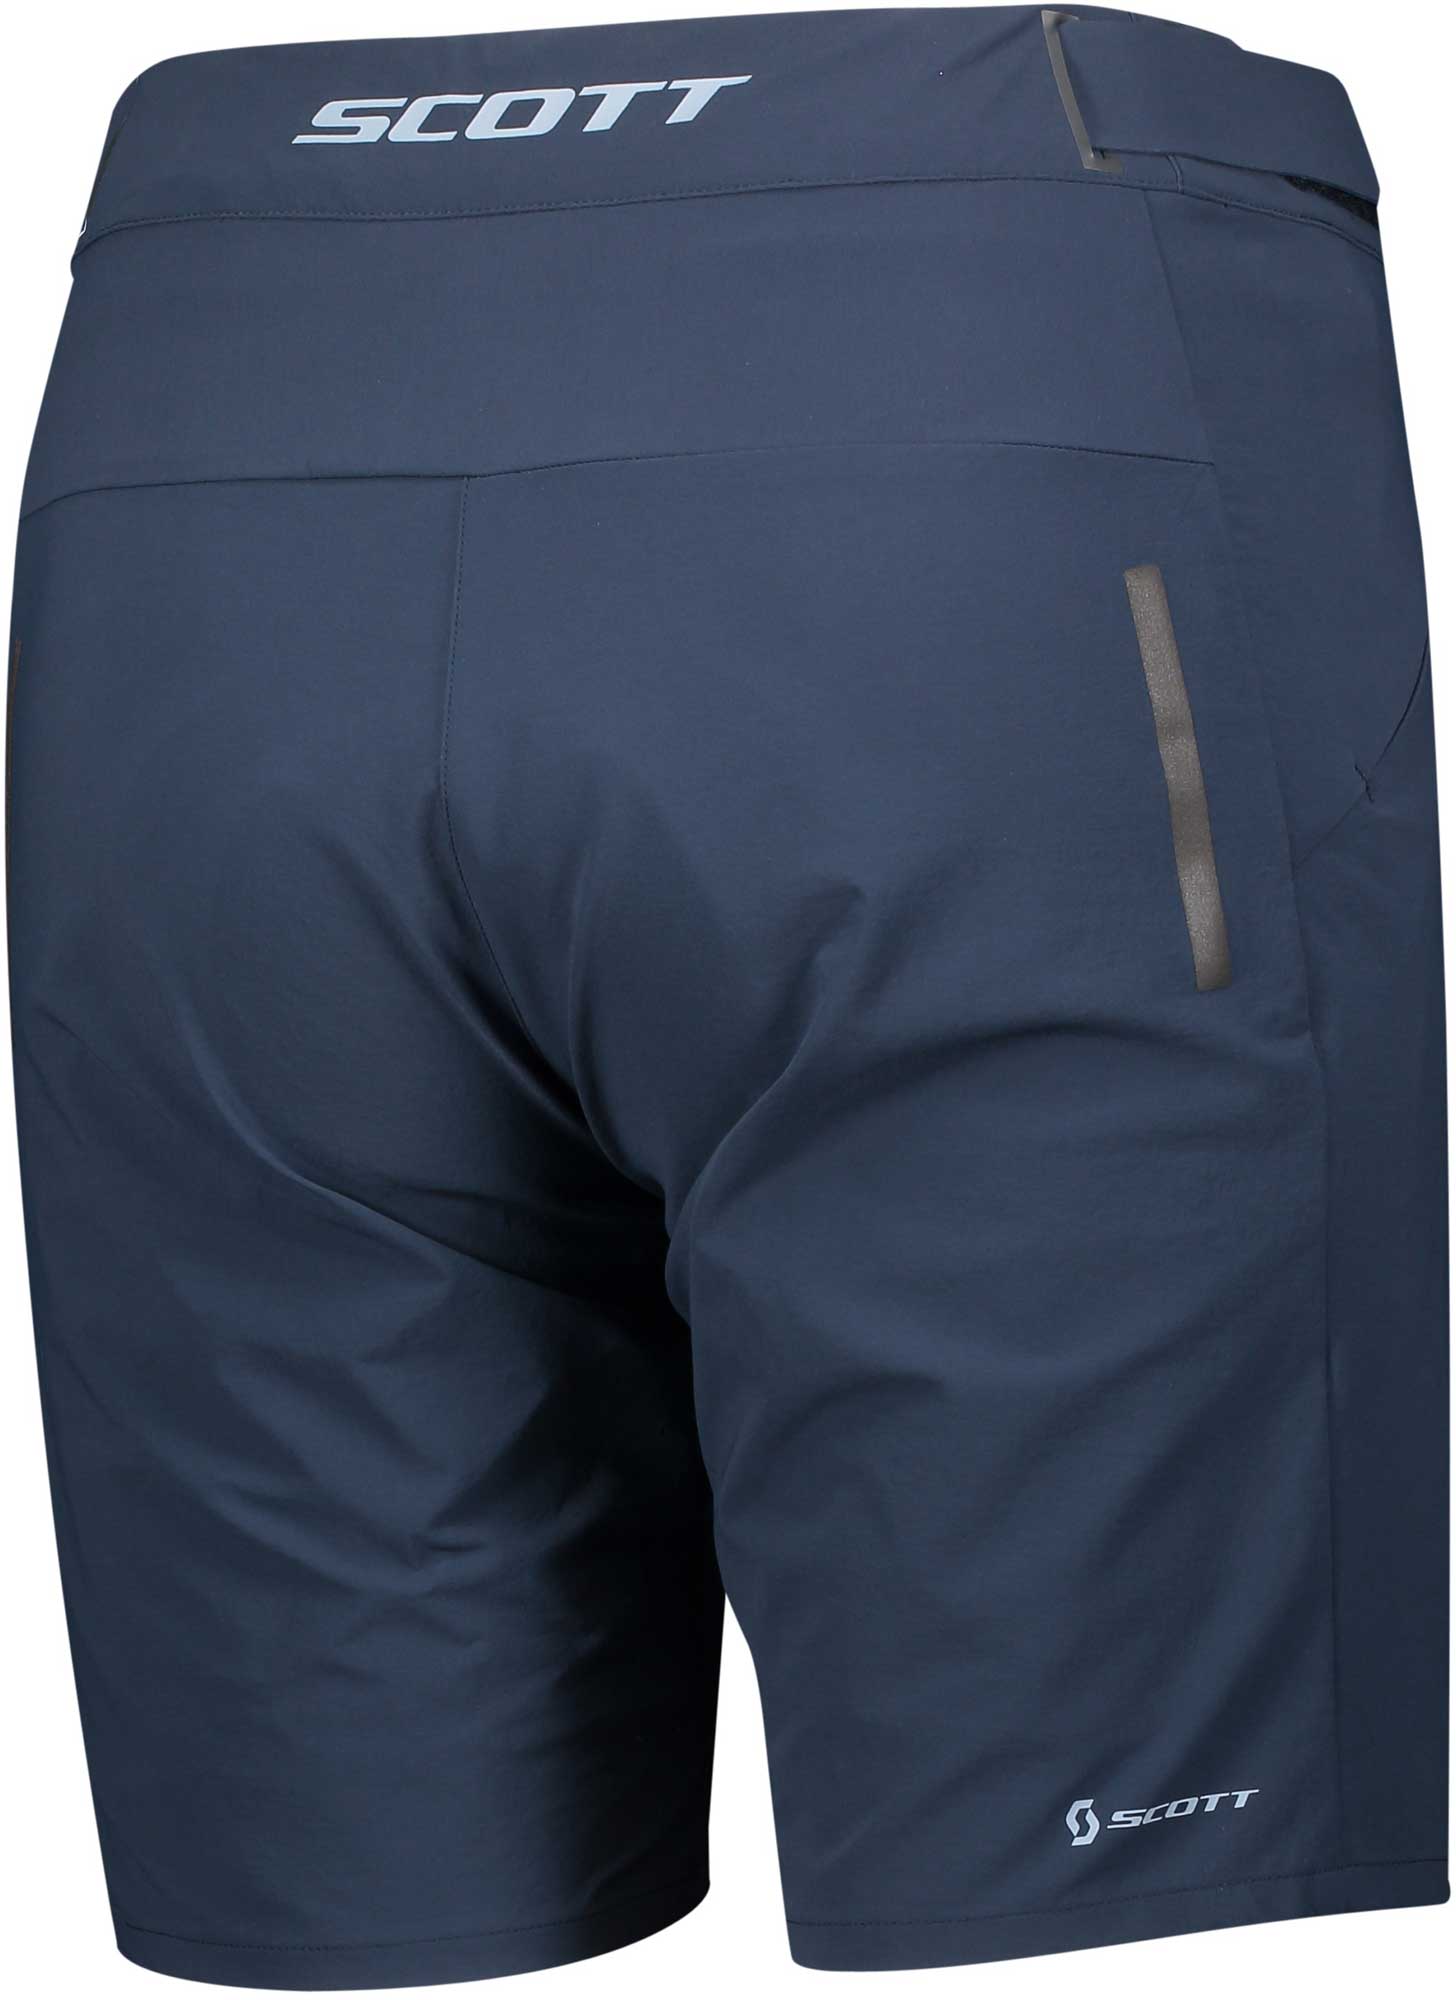 Women’s loose shorts with a cycling pad